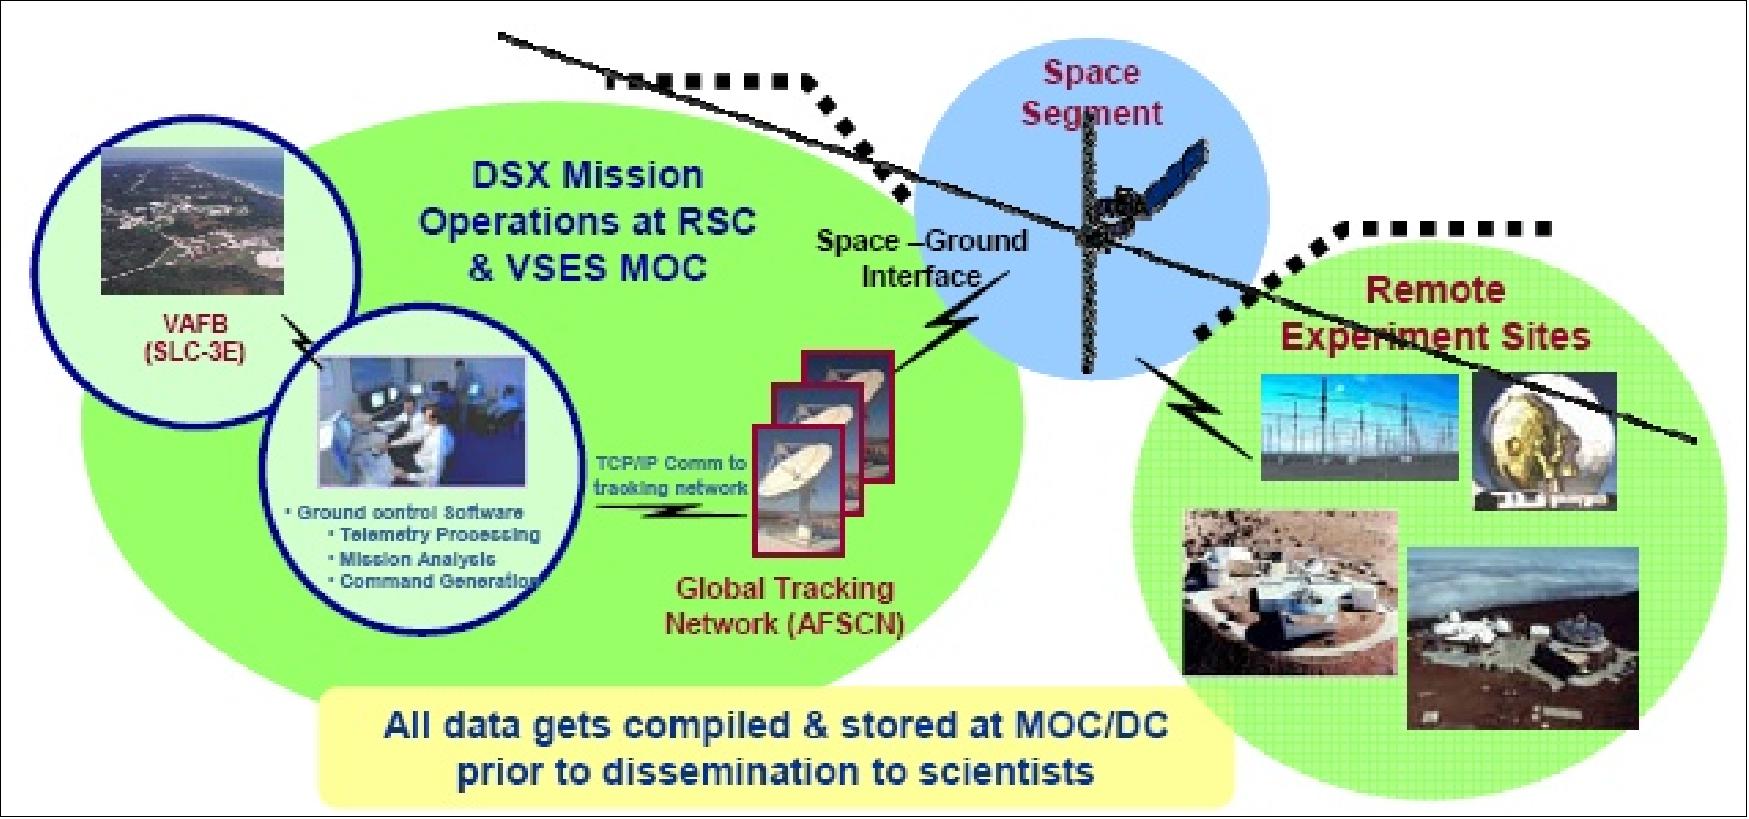 Figure 21: Overview of DSX ground system (image credit: AFRL)